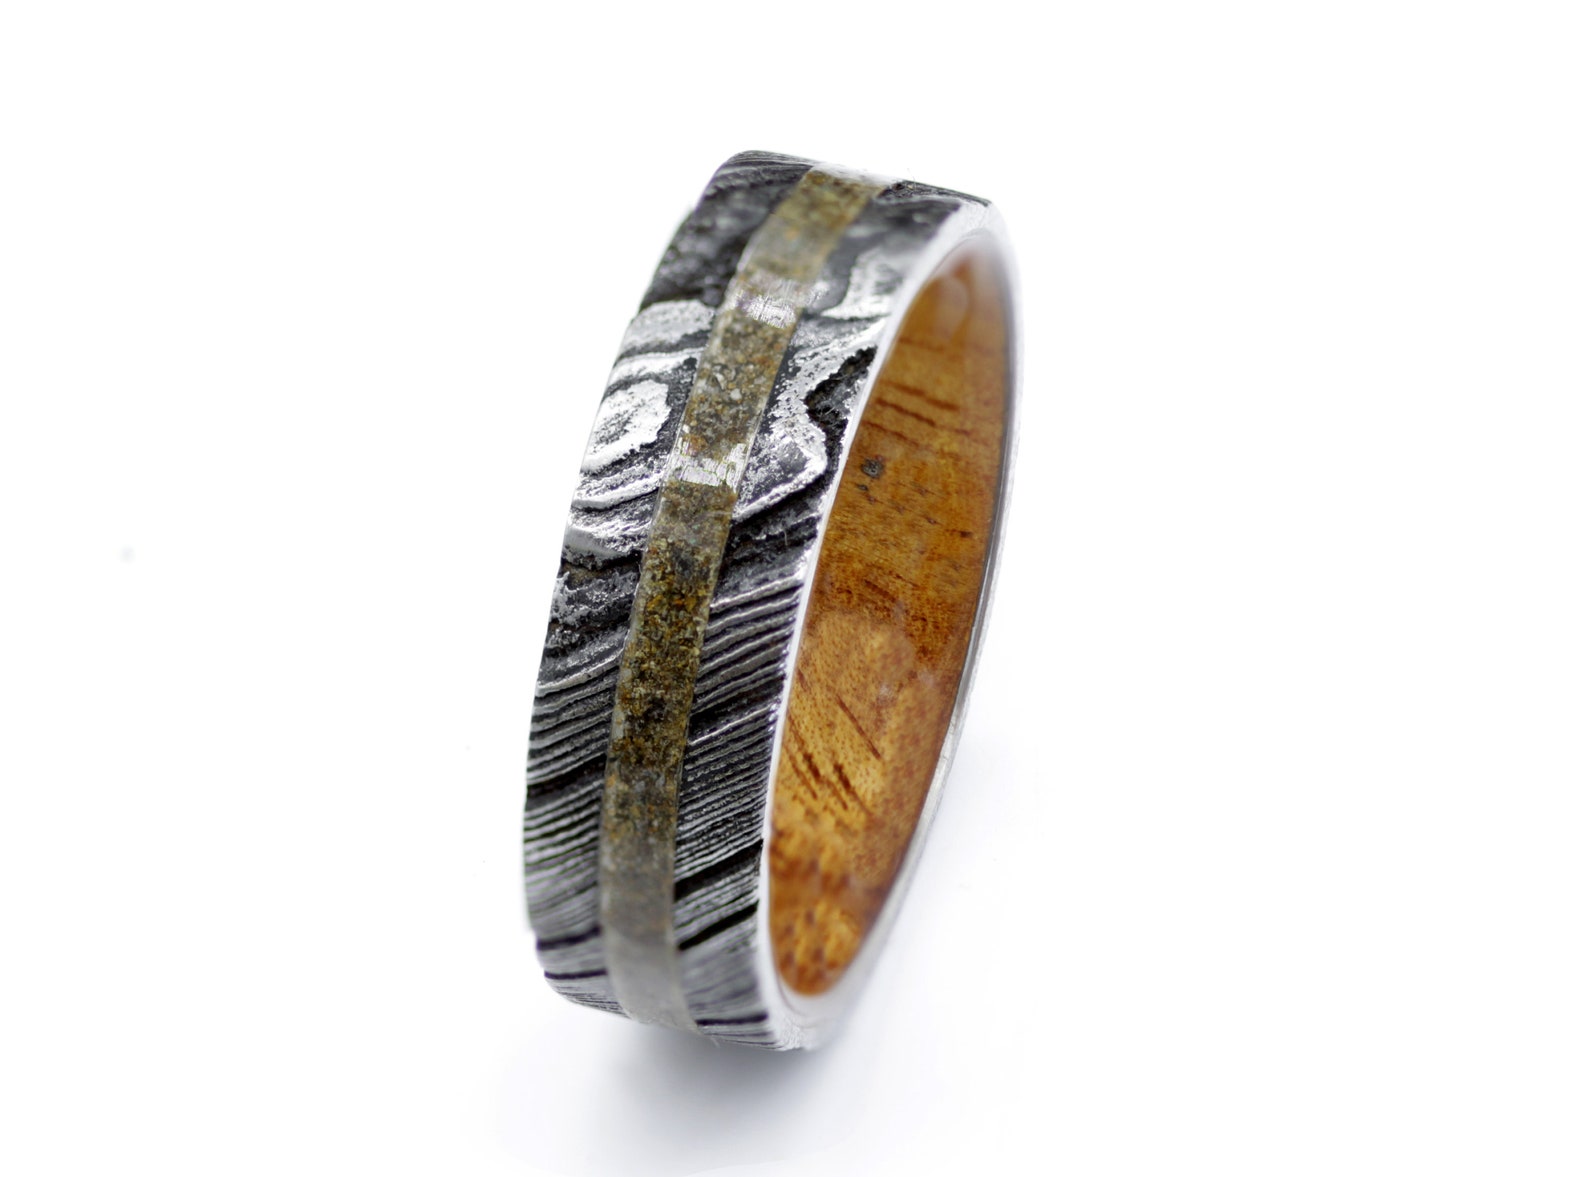 Dinosaur fossil ring Damascus steel wedding band his her